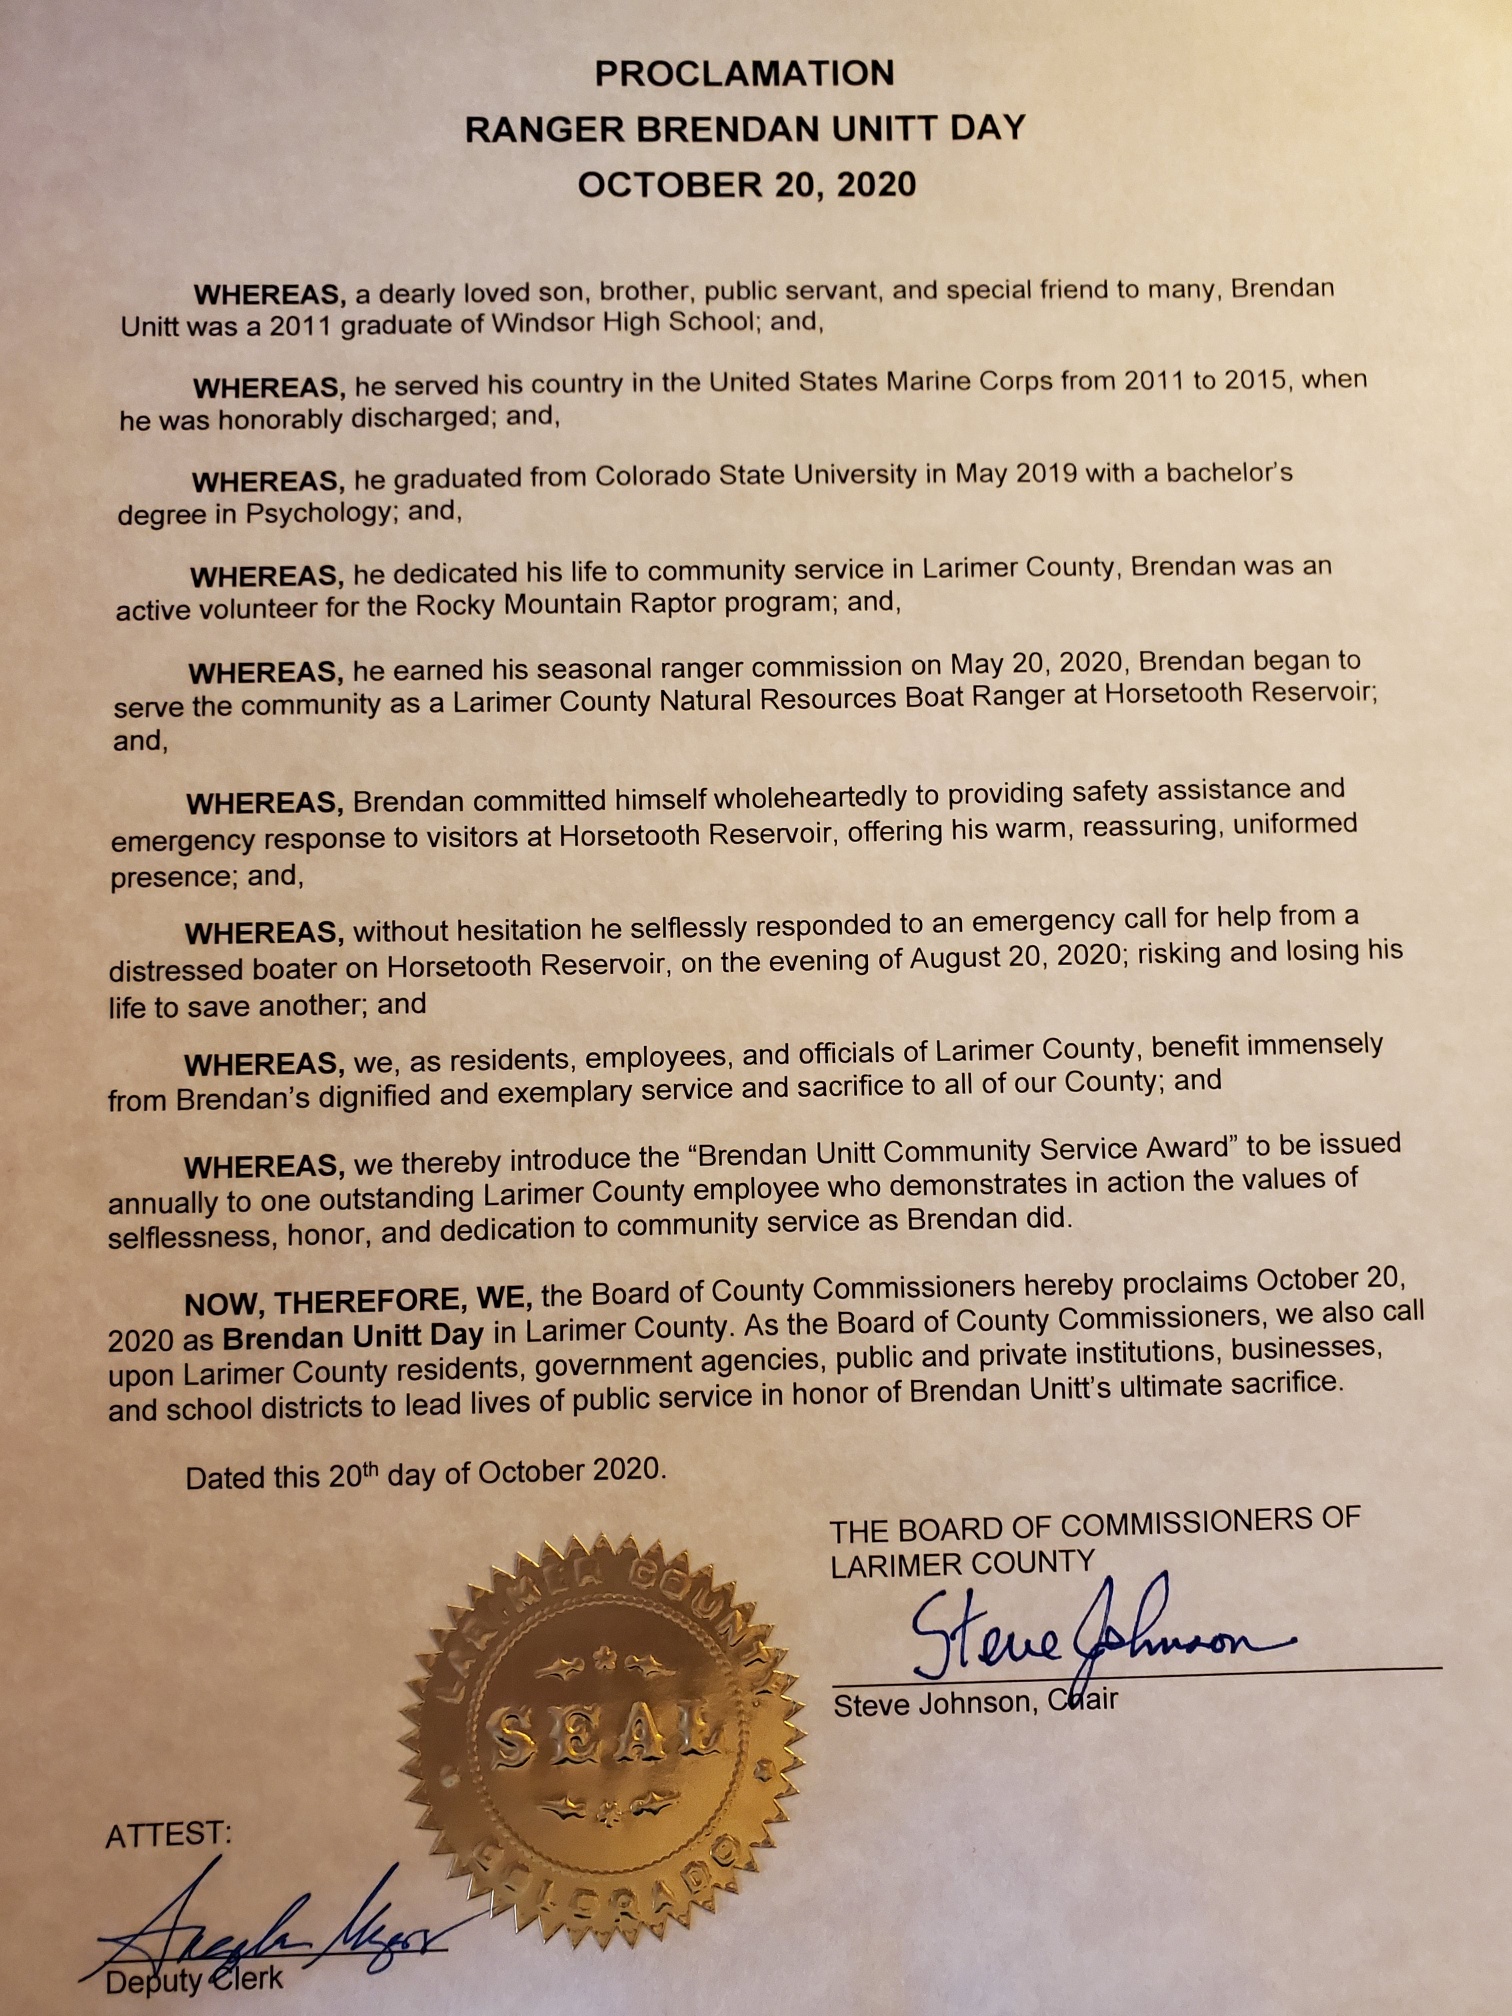 Image 1: Signed Proclamation issued October 20, 2020 as Brendan Unitt Day in Larimer County